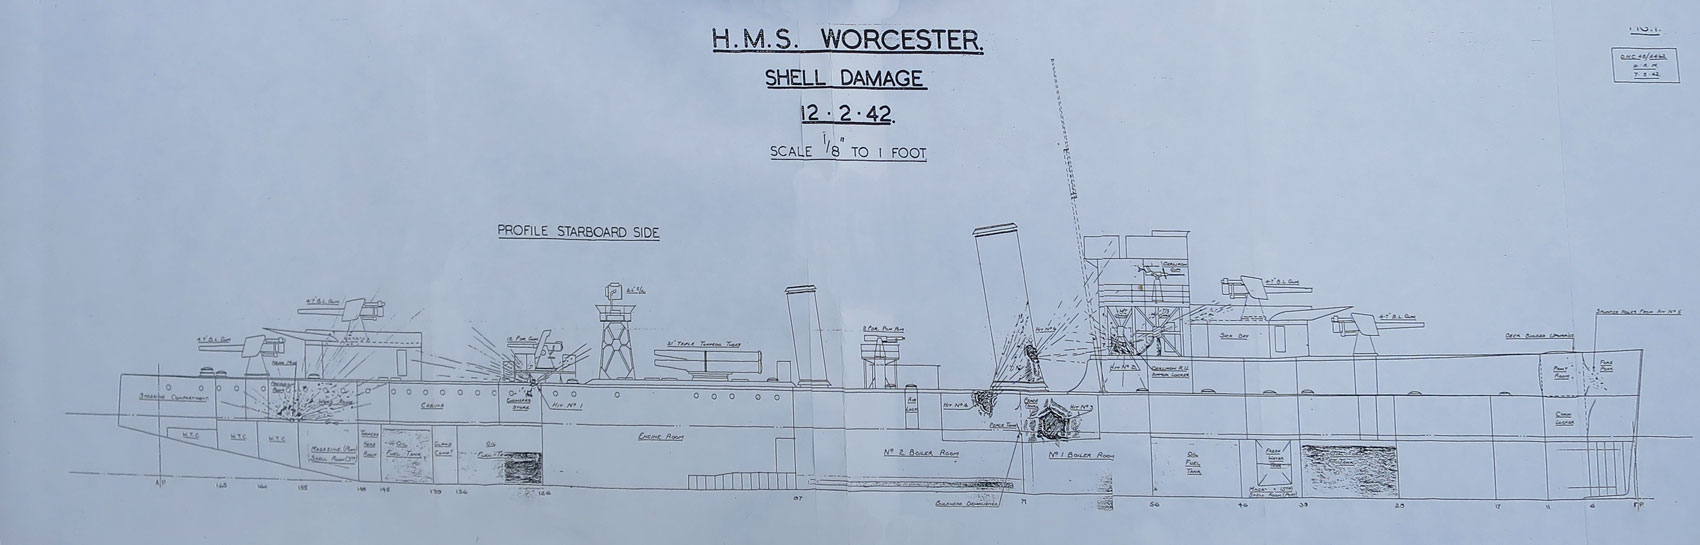 Shell damage to HMS Worcester, starboard side